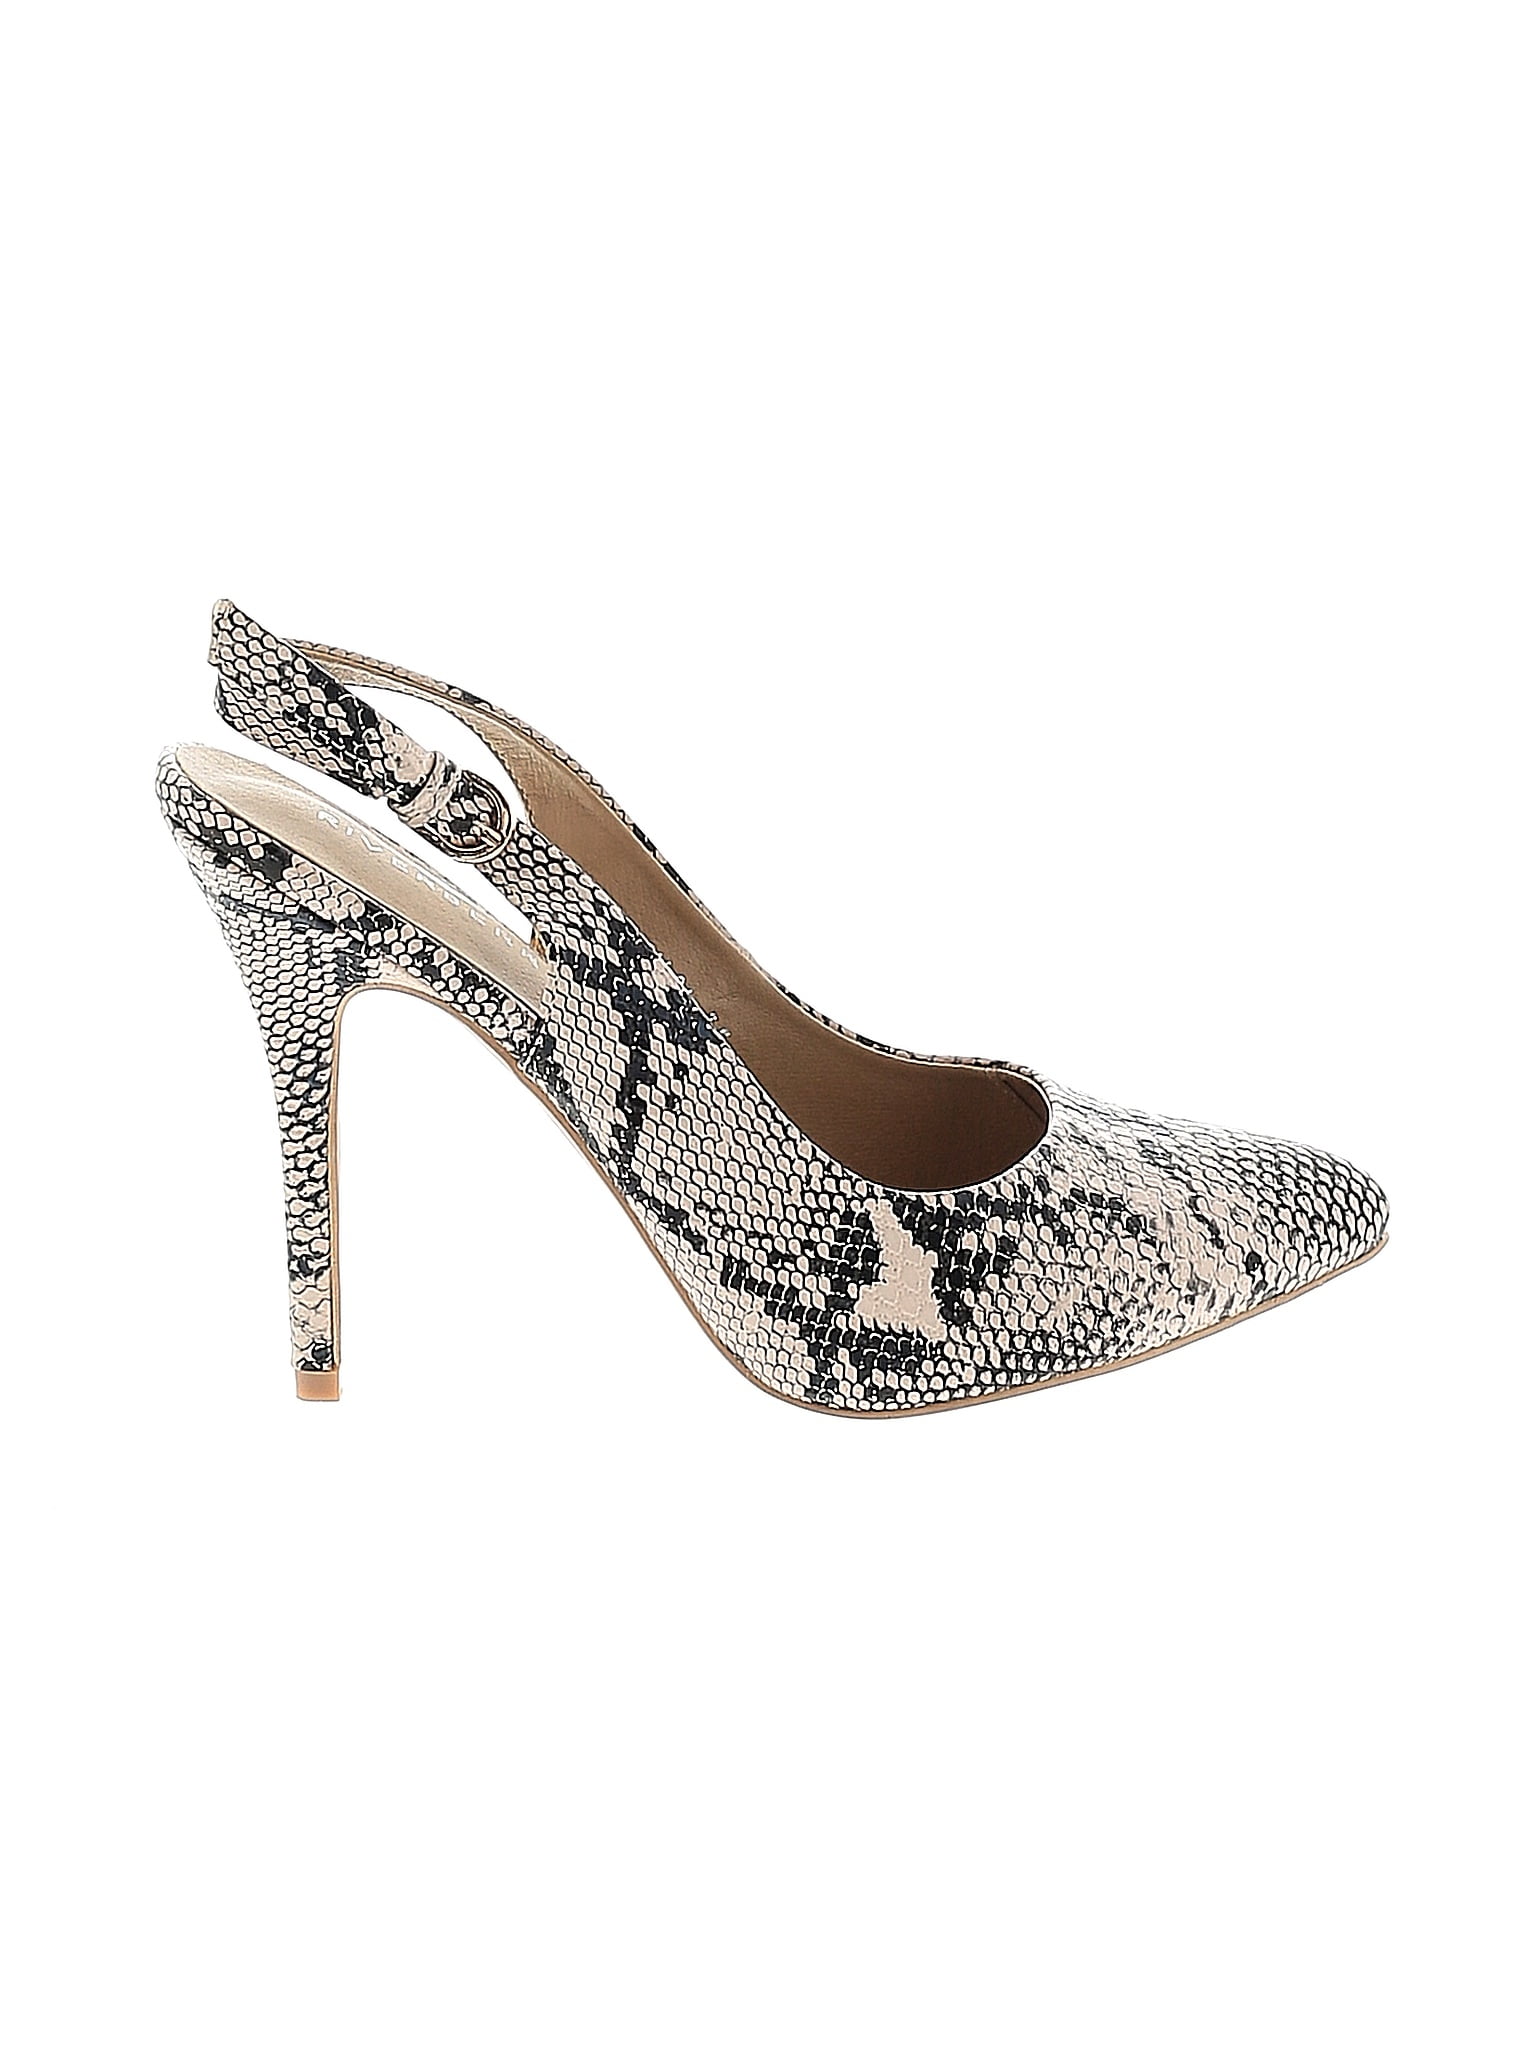 Riverberry Snake Print Multi Color Gray Heels Size 6 - 53% off